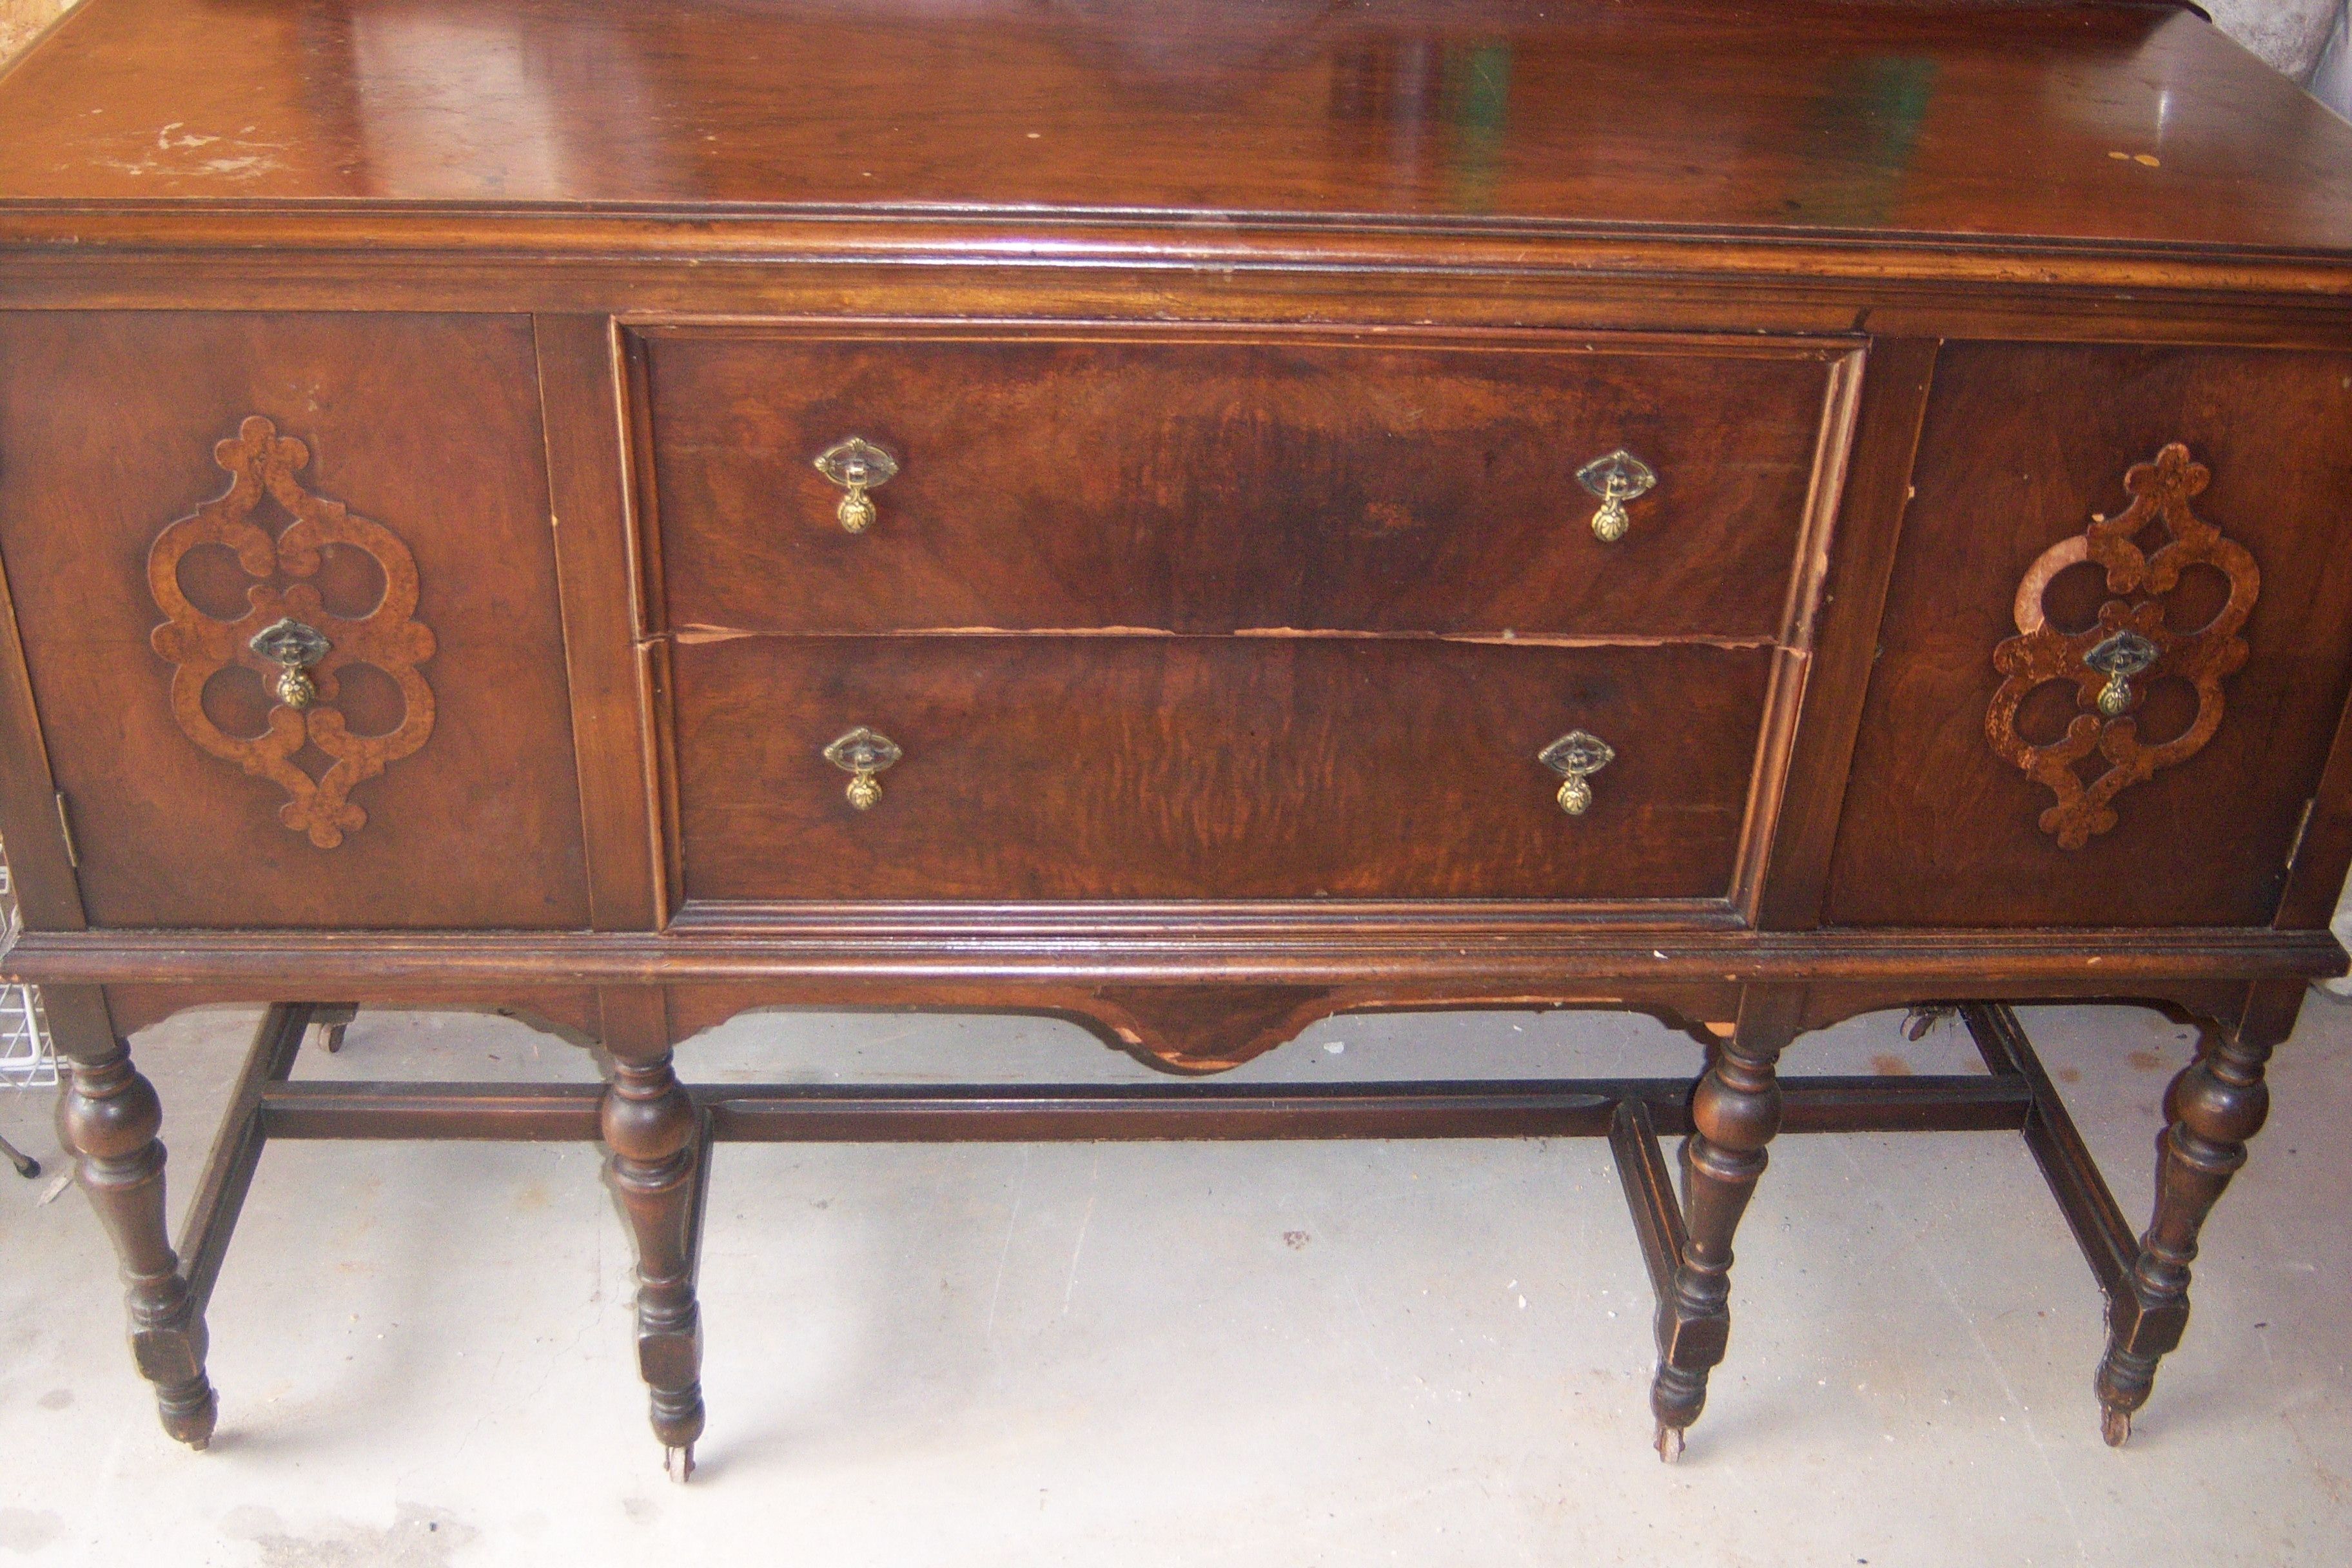 Antiques For Sale | Antique Sideboard Buffet – For Sale | Antiques Pertaining To Most Recently Released Vintage Brown Textured Sideboards (View 10 of 20)